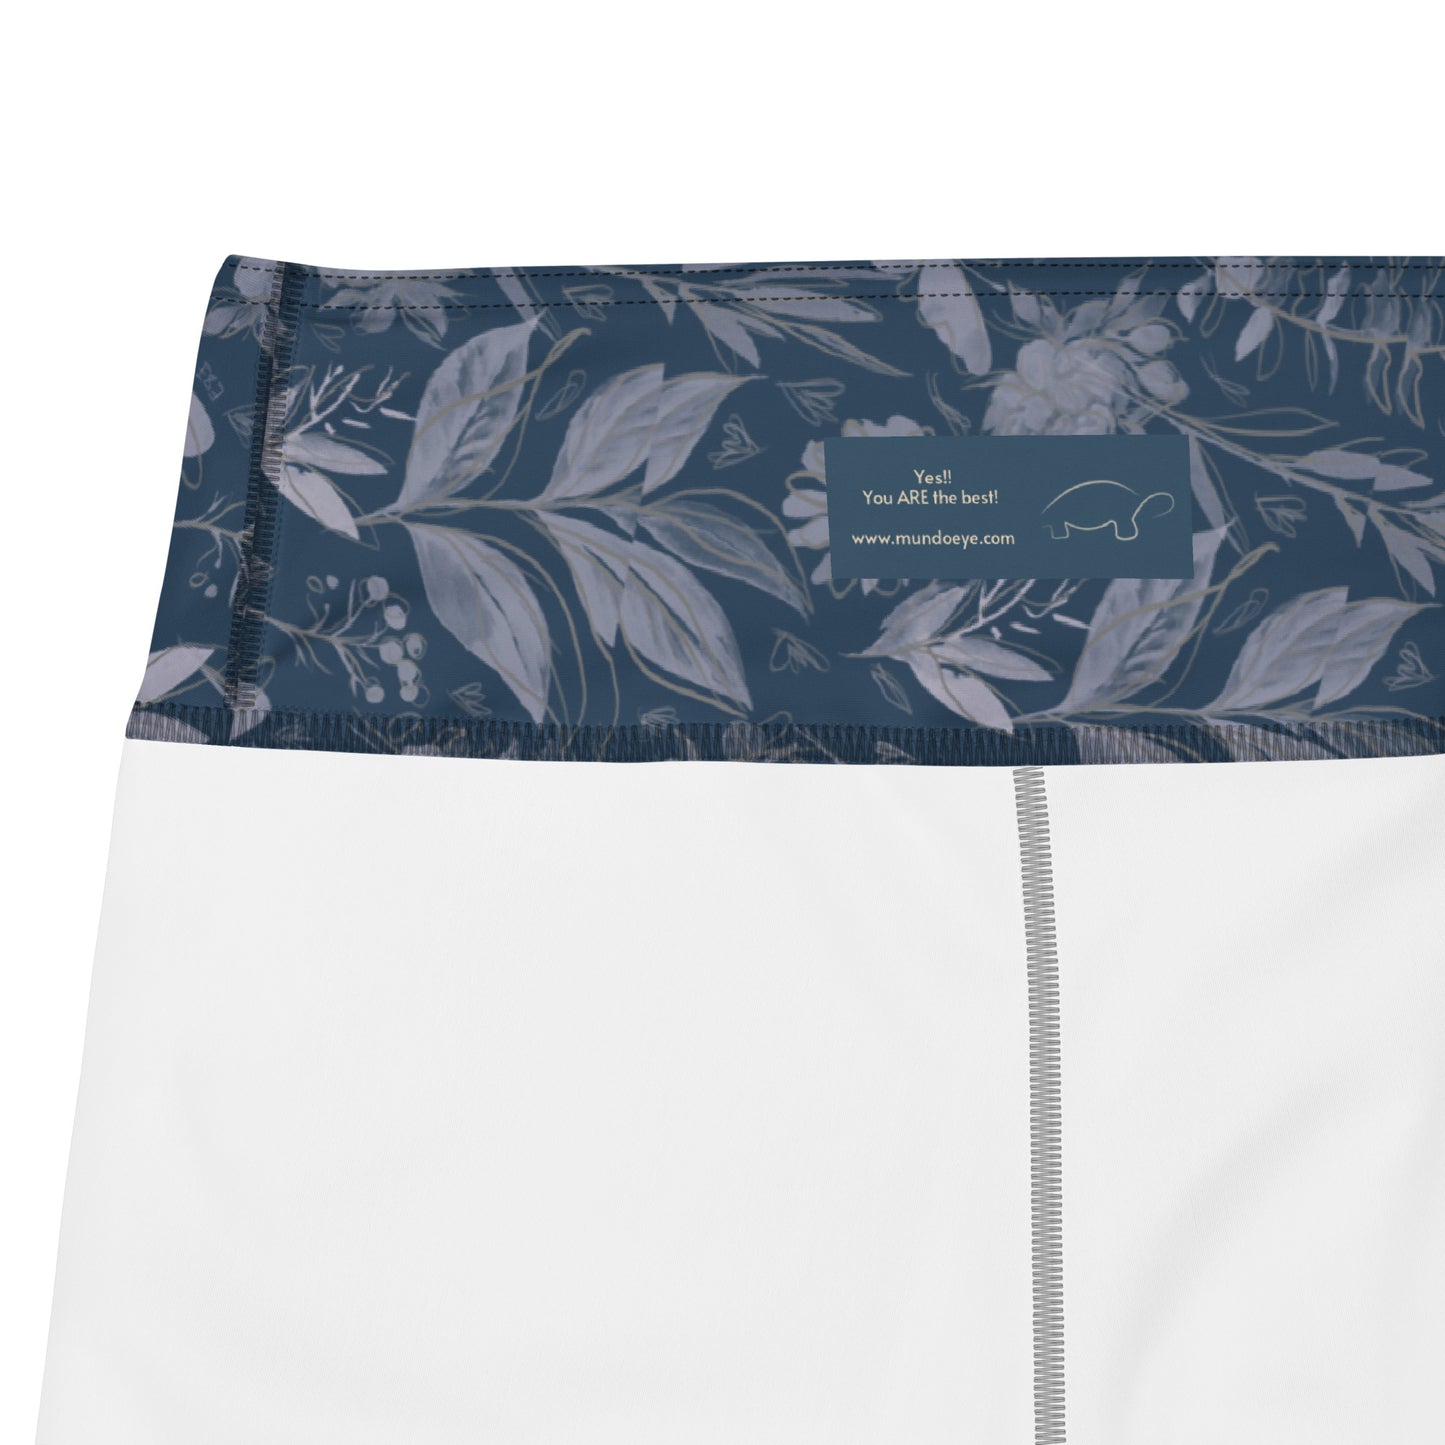 Watercolor Blue Yoga Shorts. Houston Collection. Design hand-painted by the Designer Maria Alejandra Echenique